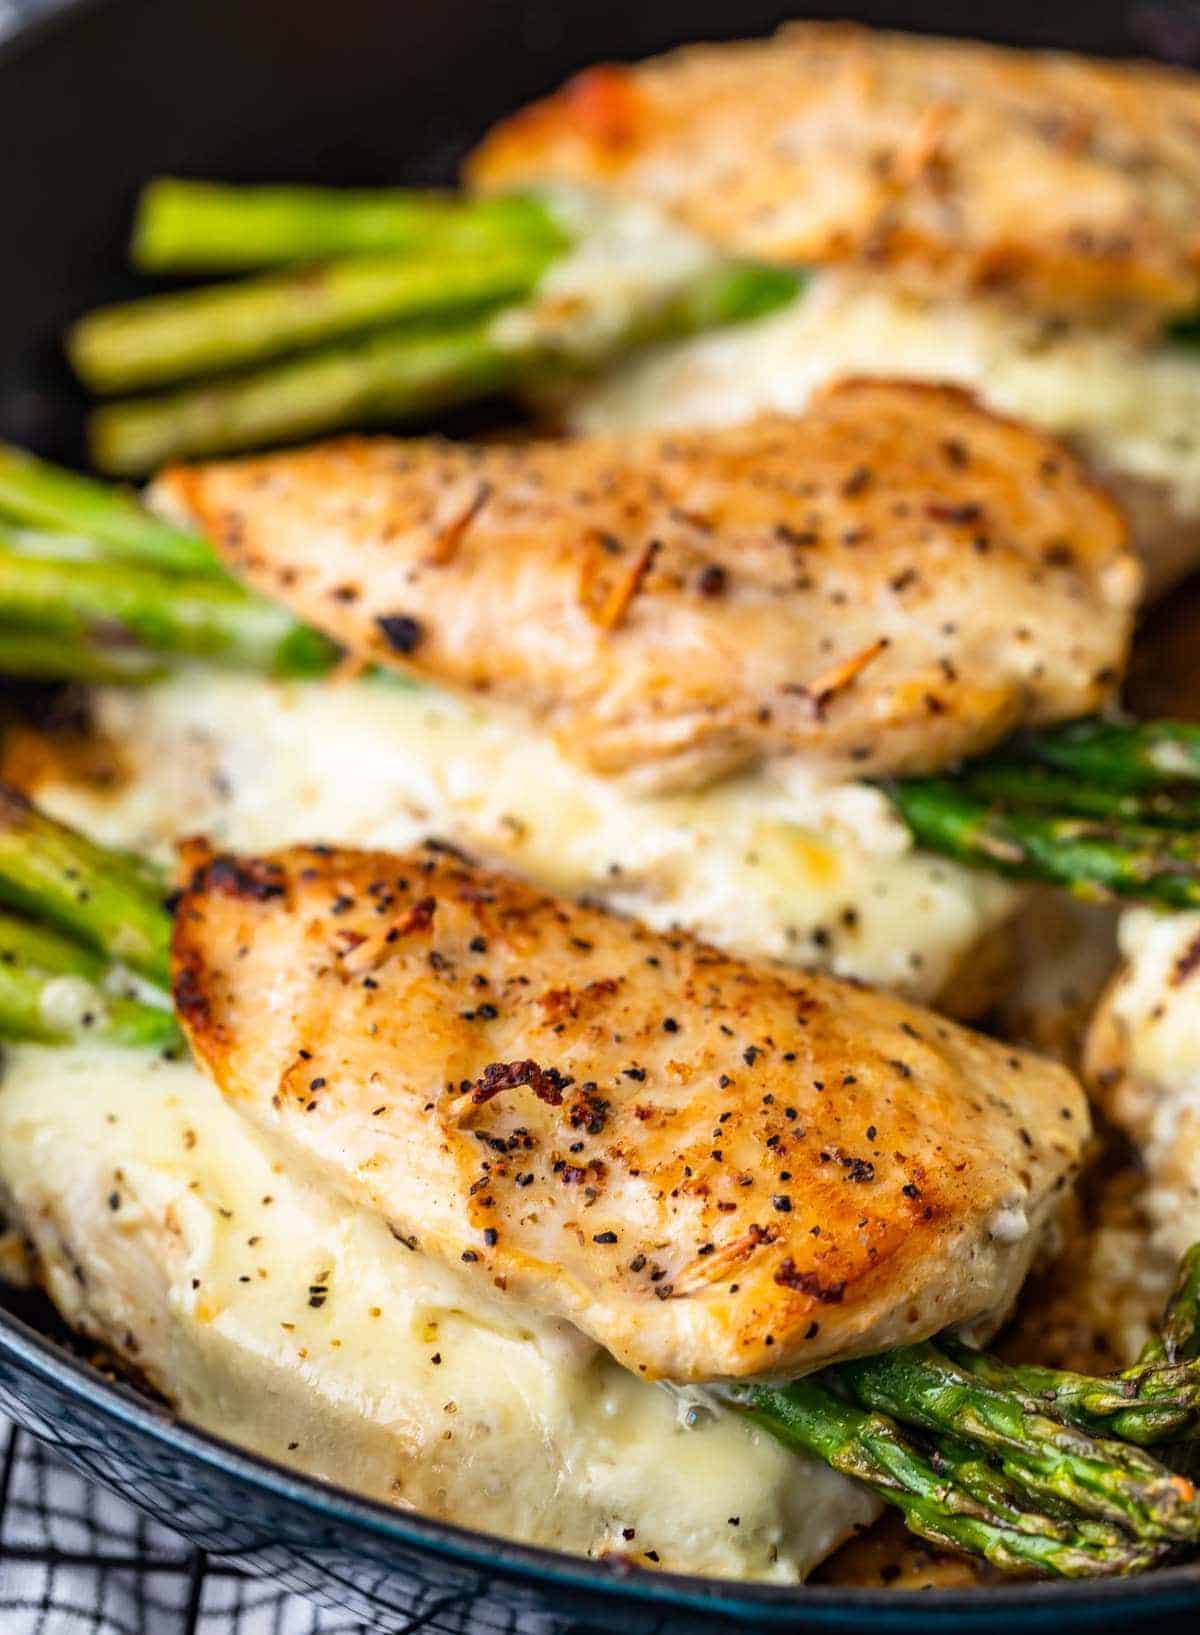 Cheesy Asparagus Stuffed Chicken up close from the side